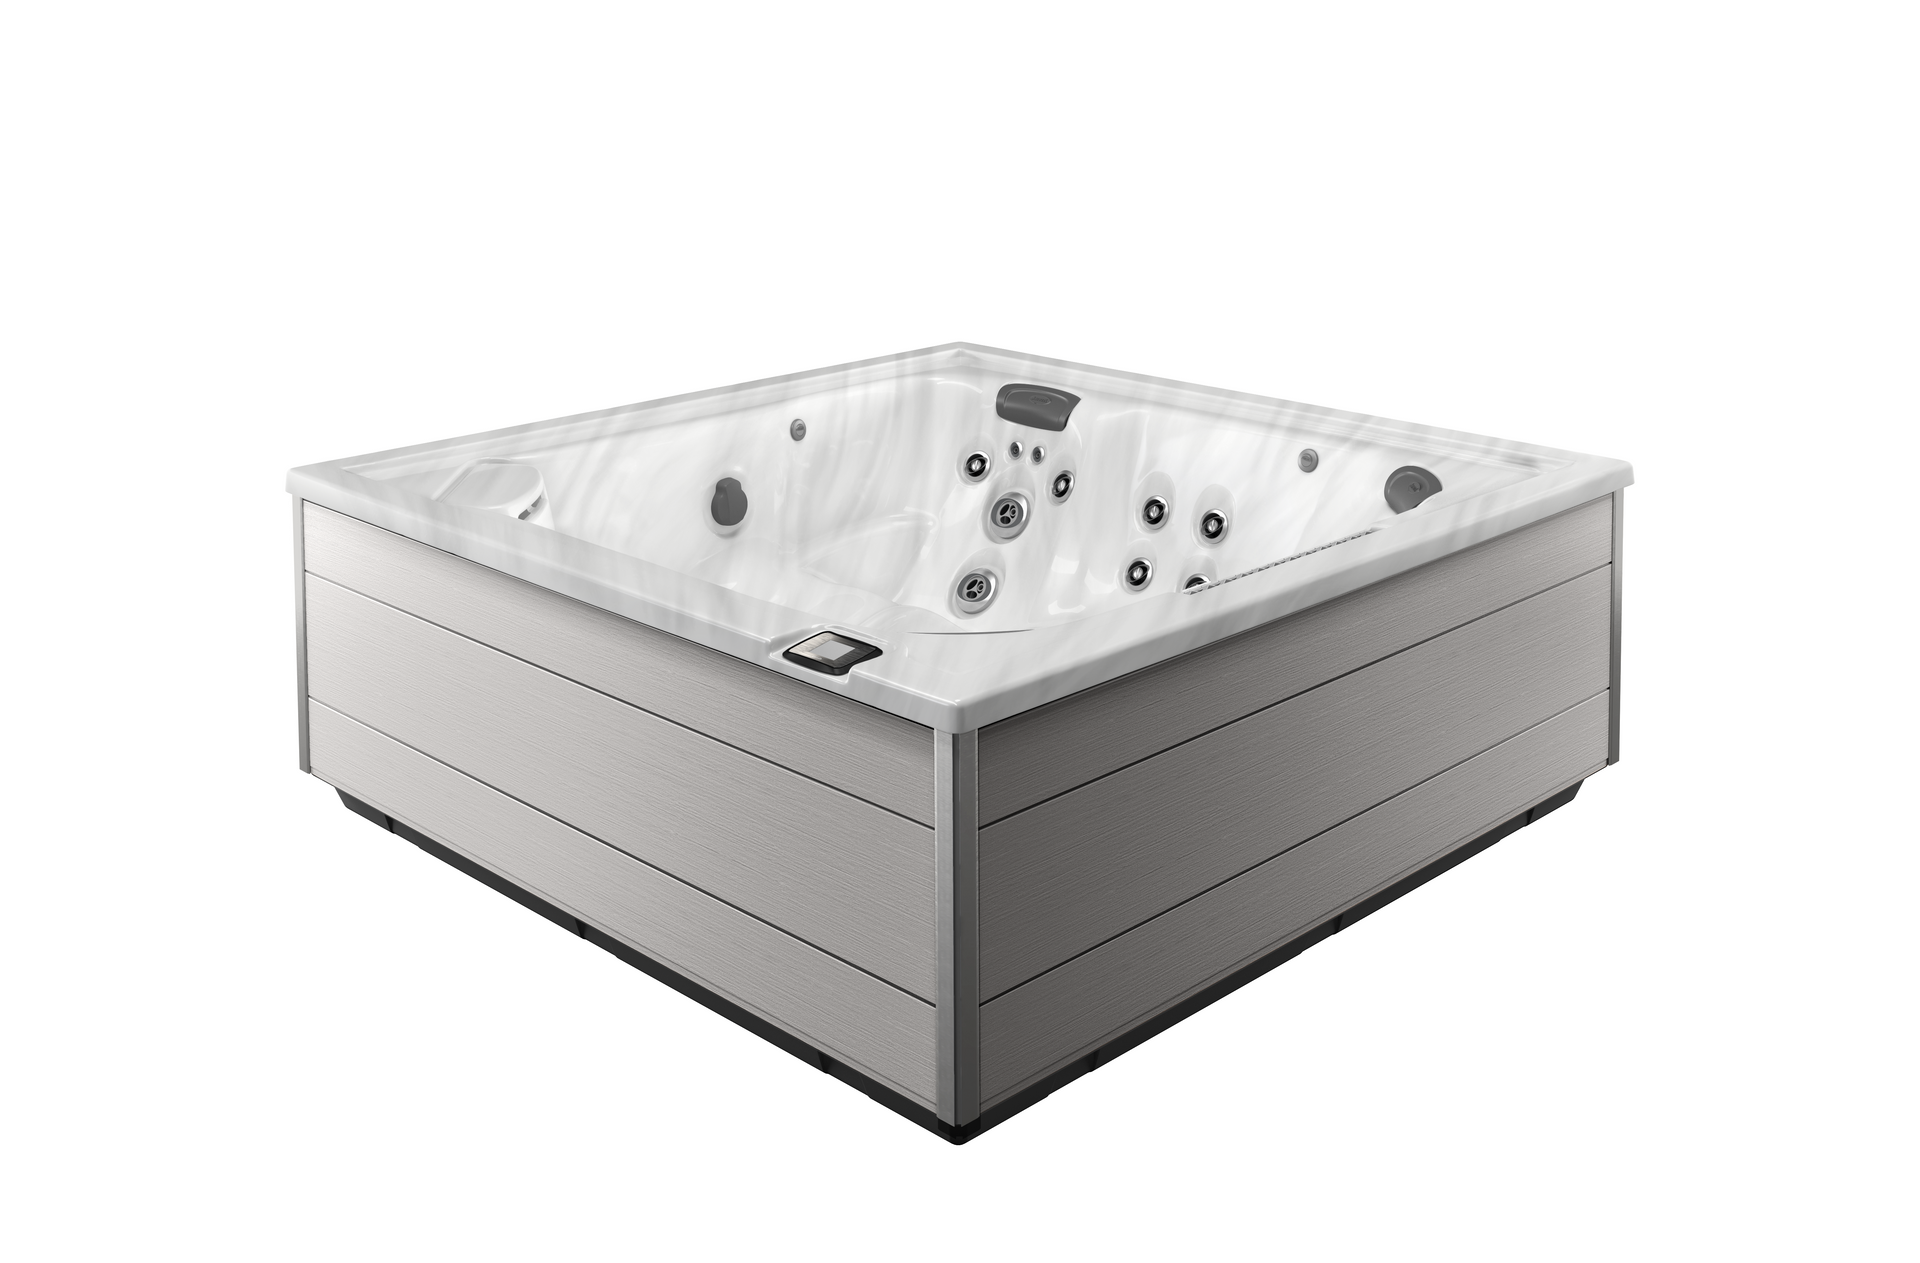 The Jacuzzi J-LXL Is Available From Columbia Pool & Spa